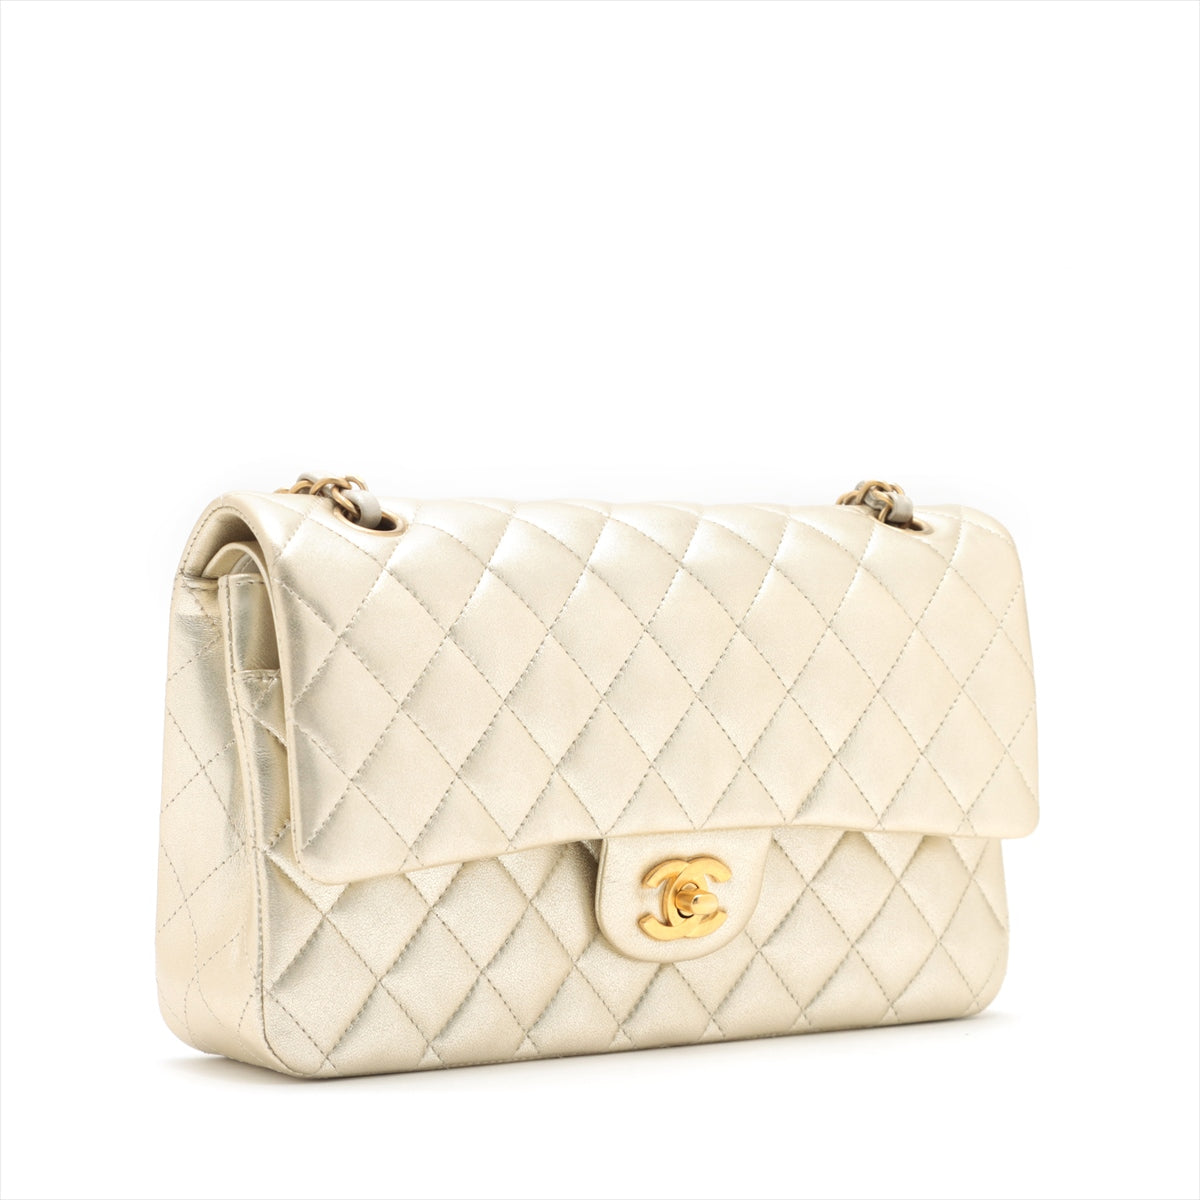 Chanel Matelasse Ram leather Double flap Double chain bag Gold Gold Metal fittings There is an IC chip